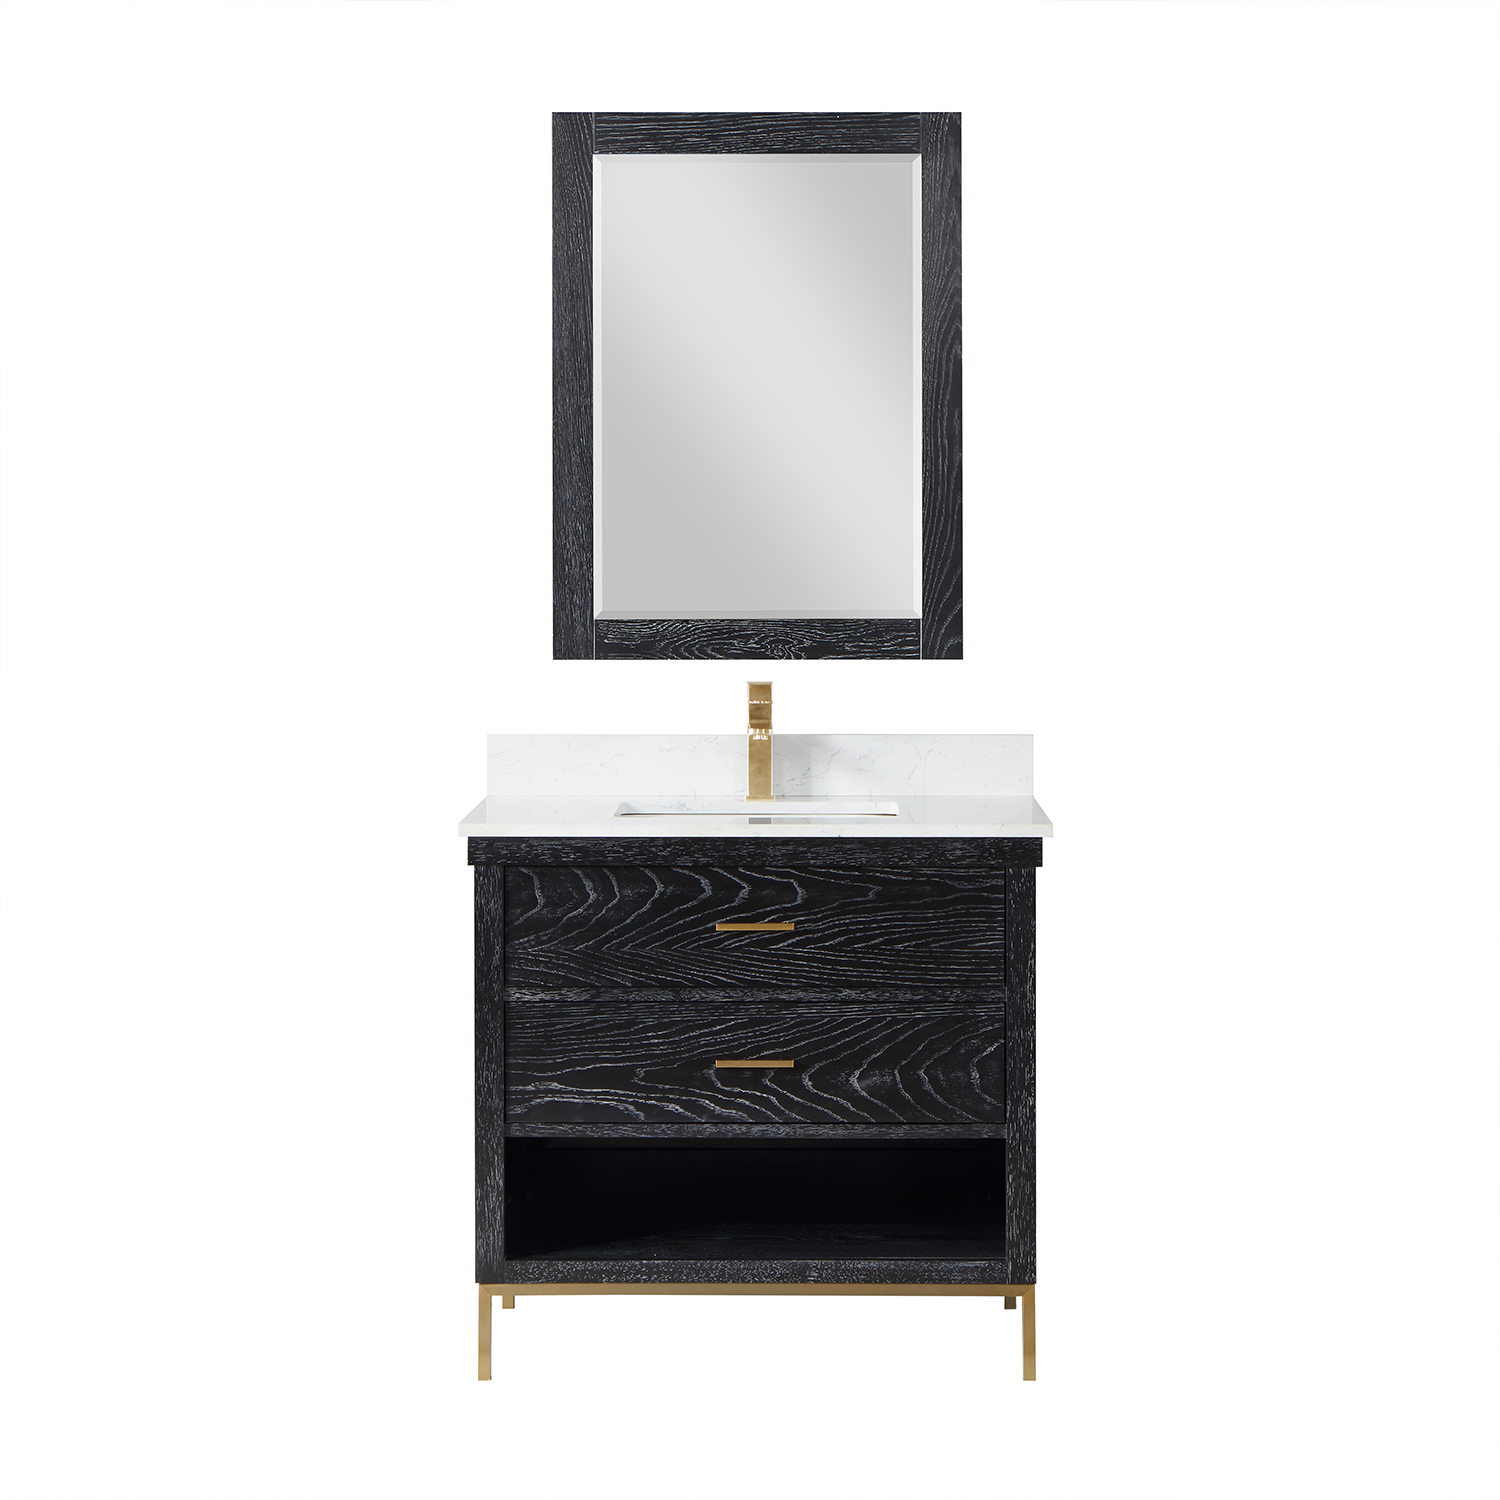 Issac Edwards Collection 36" Single Bathroom Vanity Set in Black Oak with Carrara White Composite Stone Countertop without Mirror 